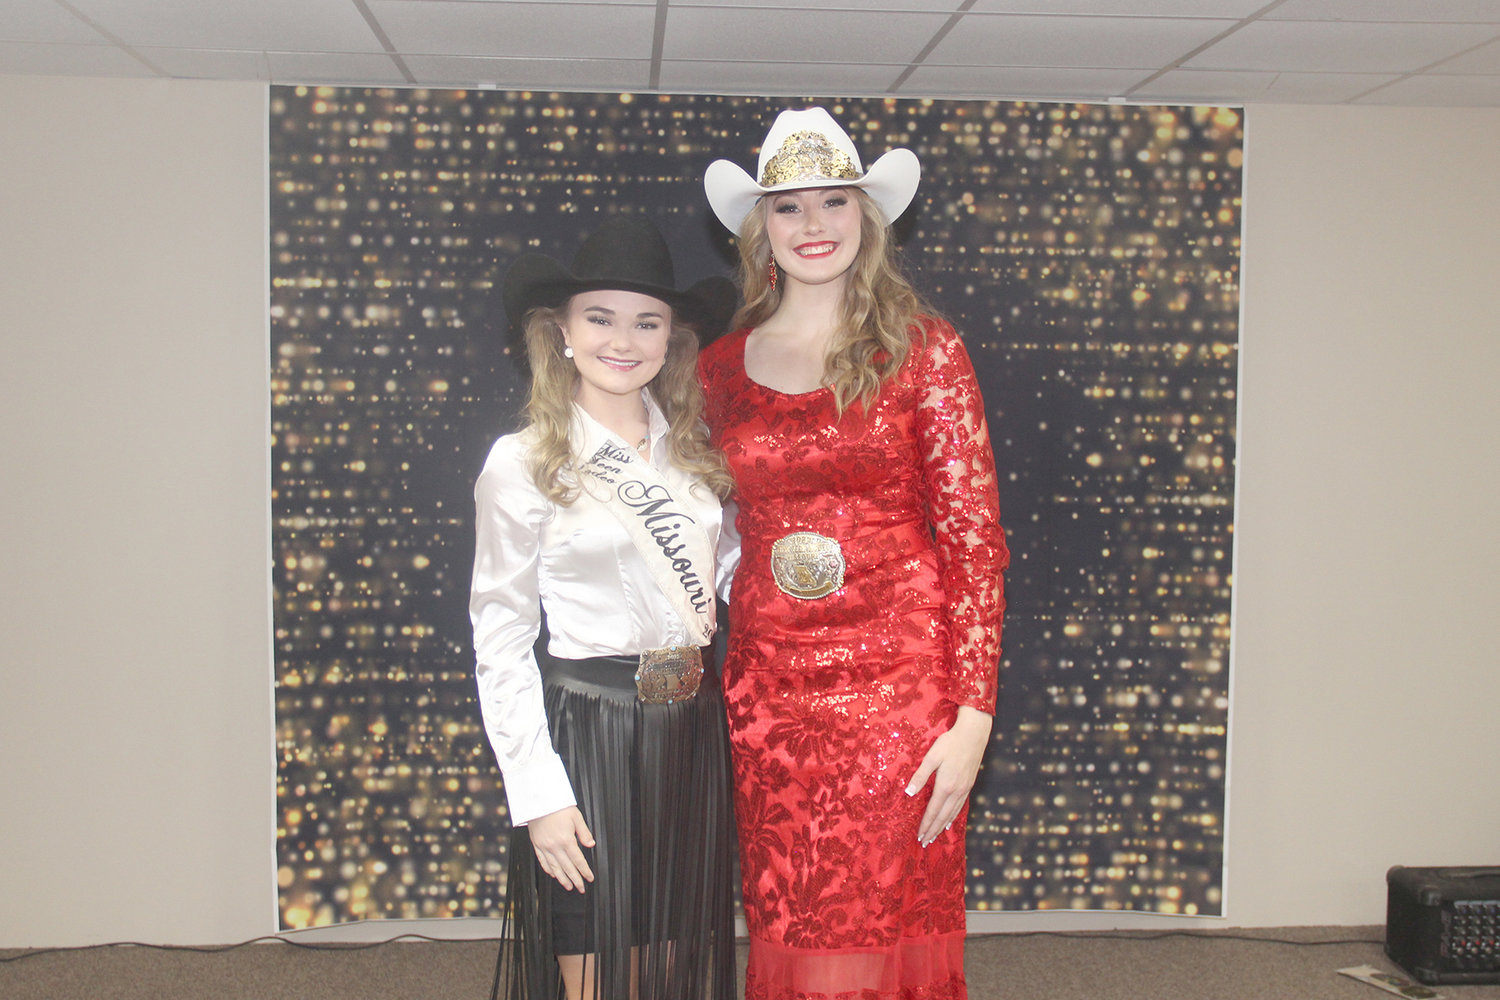 MISS TEEN RODEO — Twi-Anna Coleman, right, accepts the crown of Miss Teen Rodeo Missouri from her predecessor, Stevie Wood, during a coronation event Jan. 28 in Warrenton. Coleman is a Warrenton native who will travel to help represent the sport of rodeo for a year.